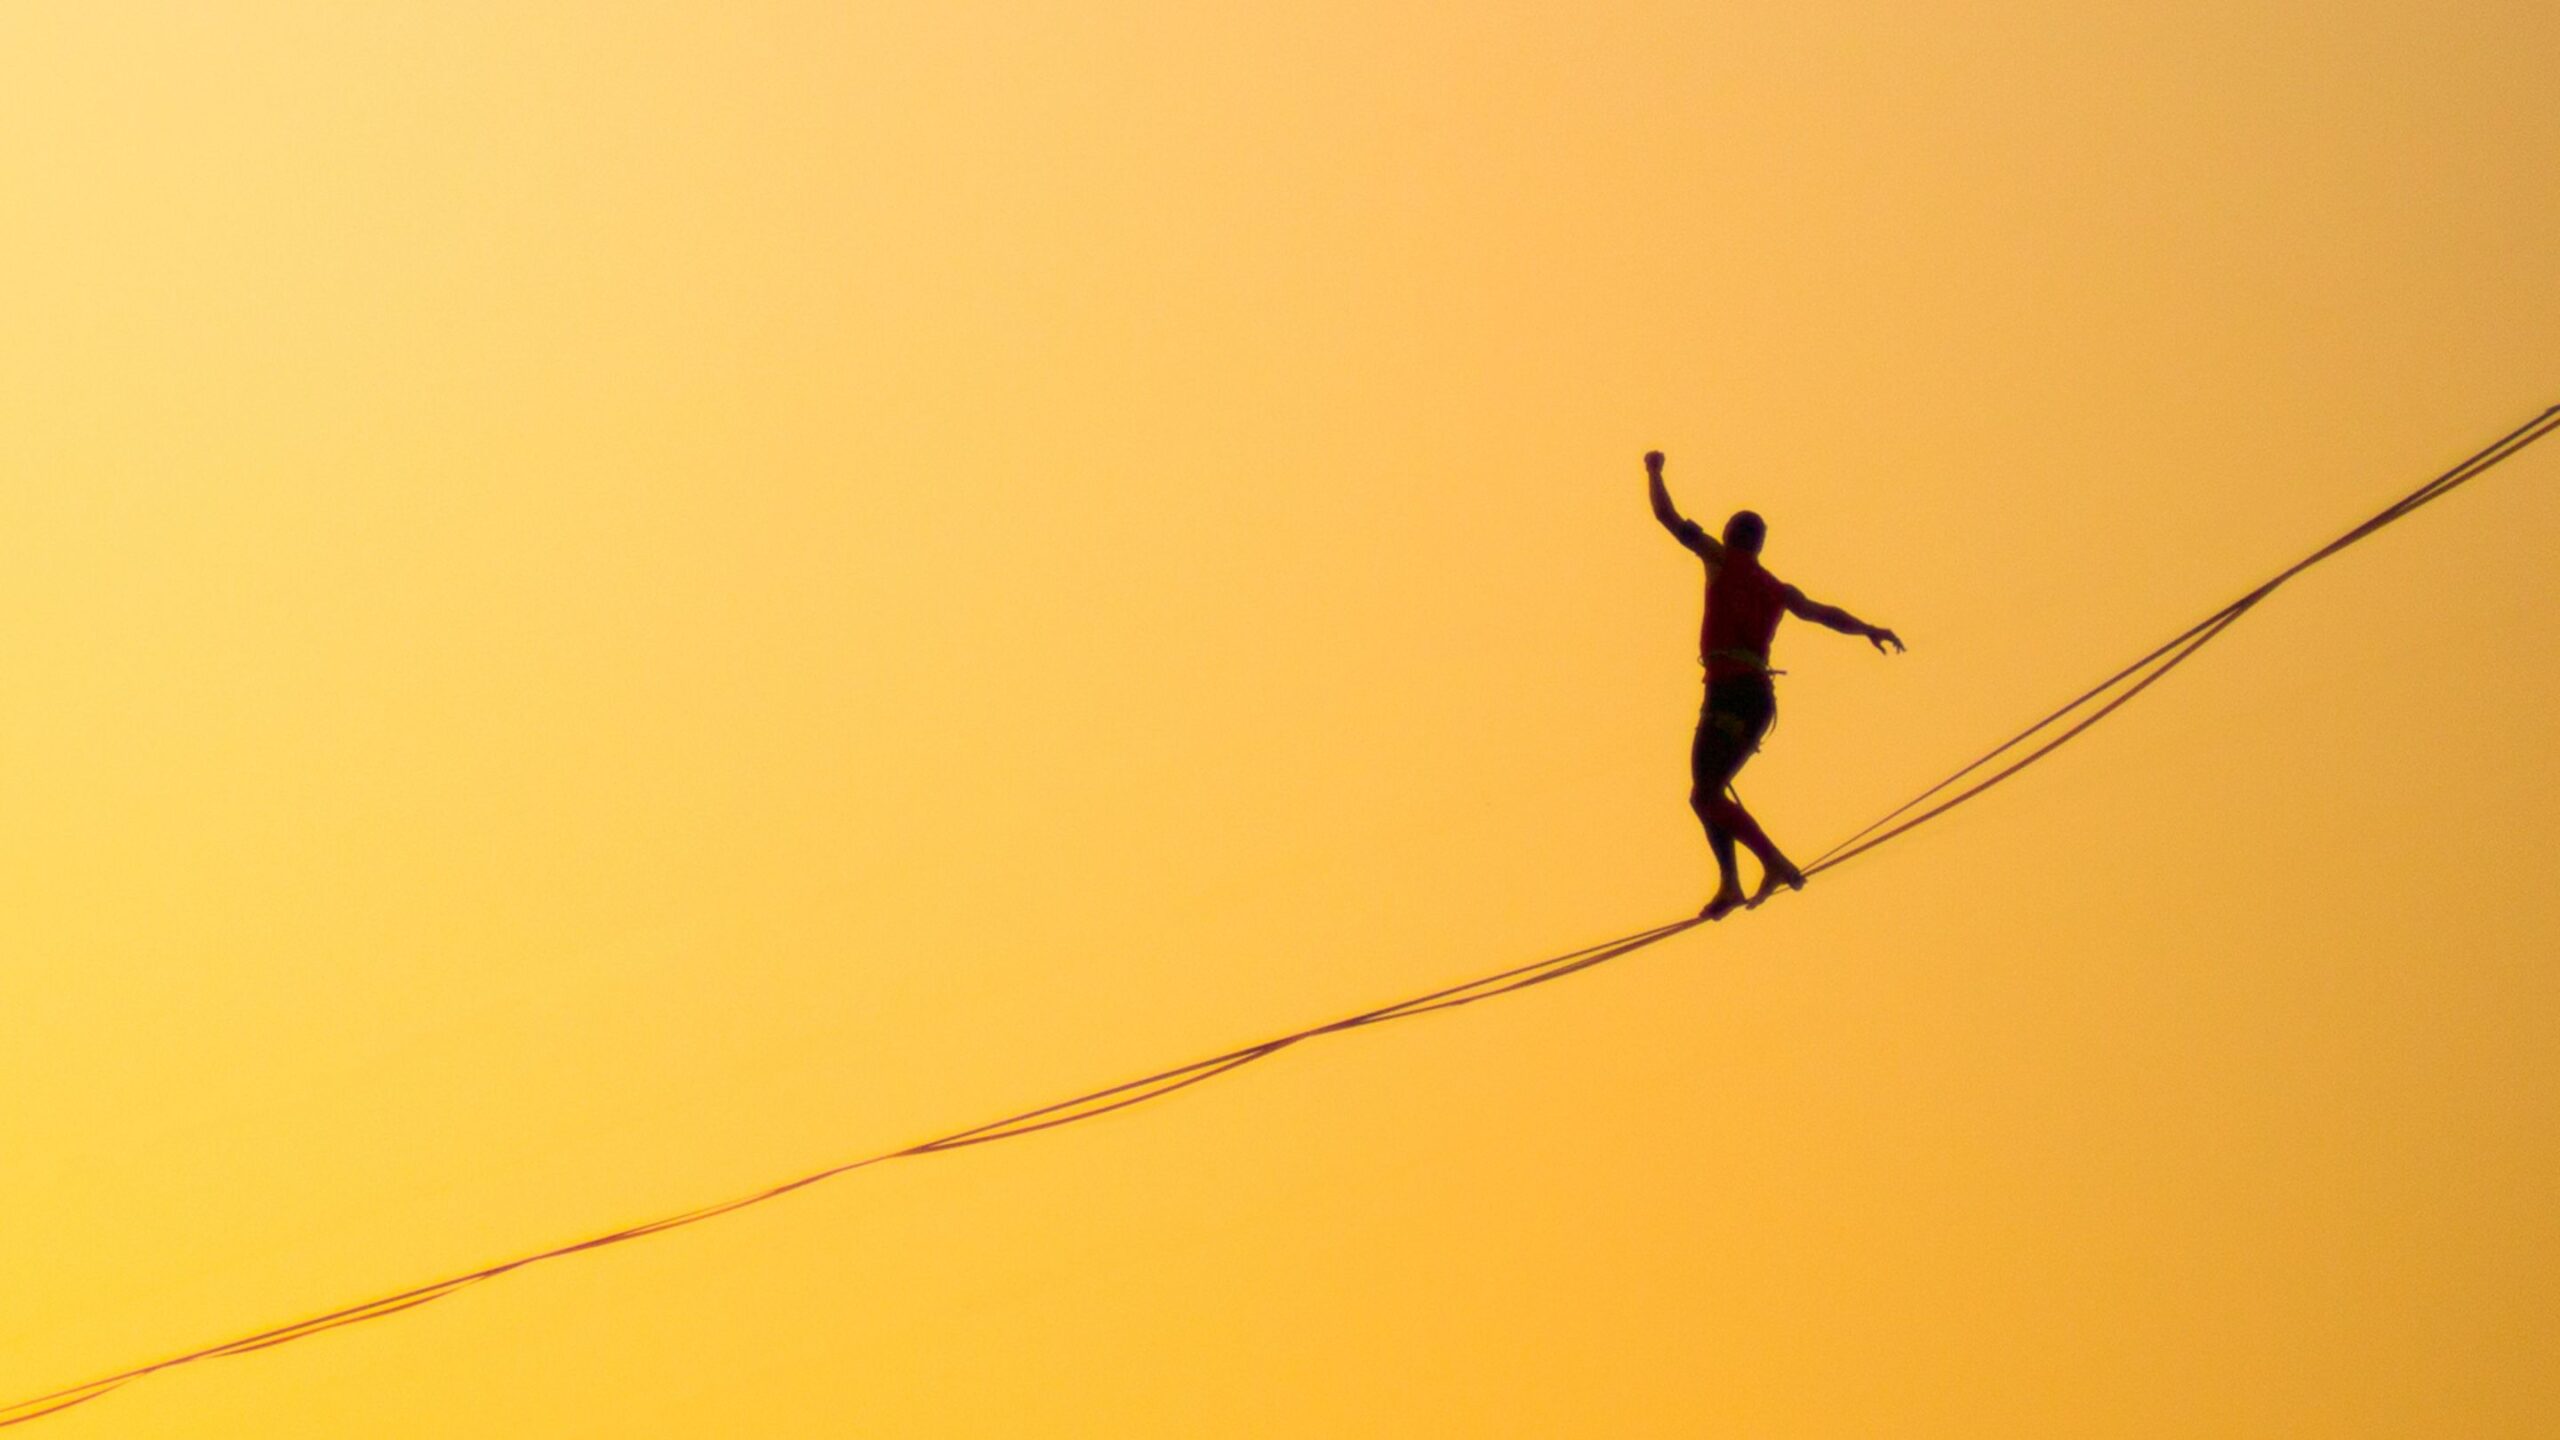 a silhouette of a man balancing on a wire